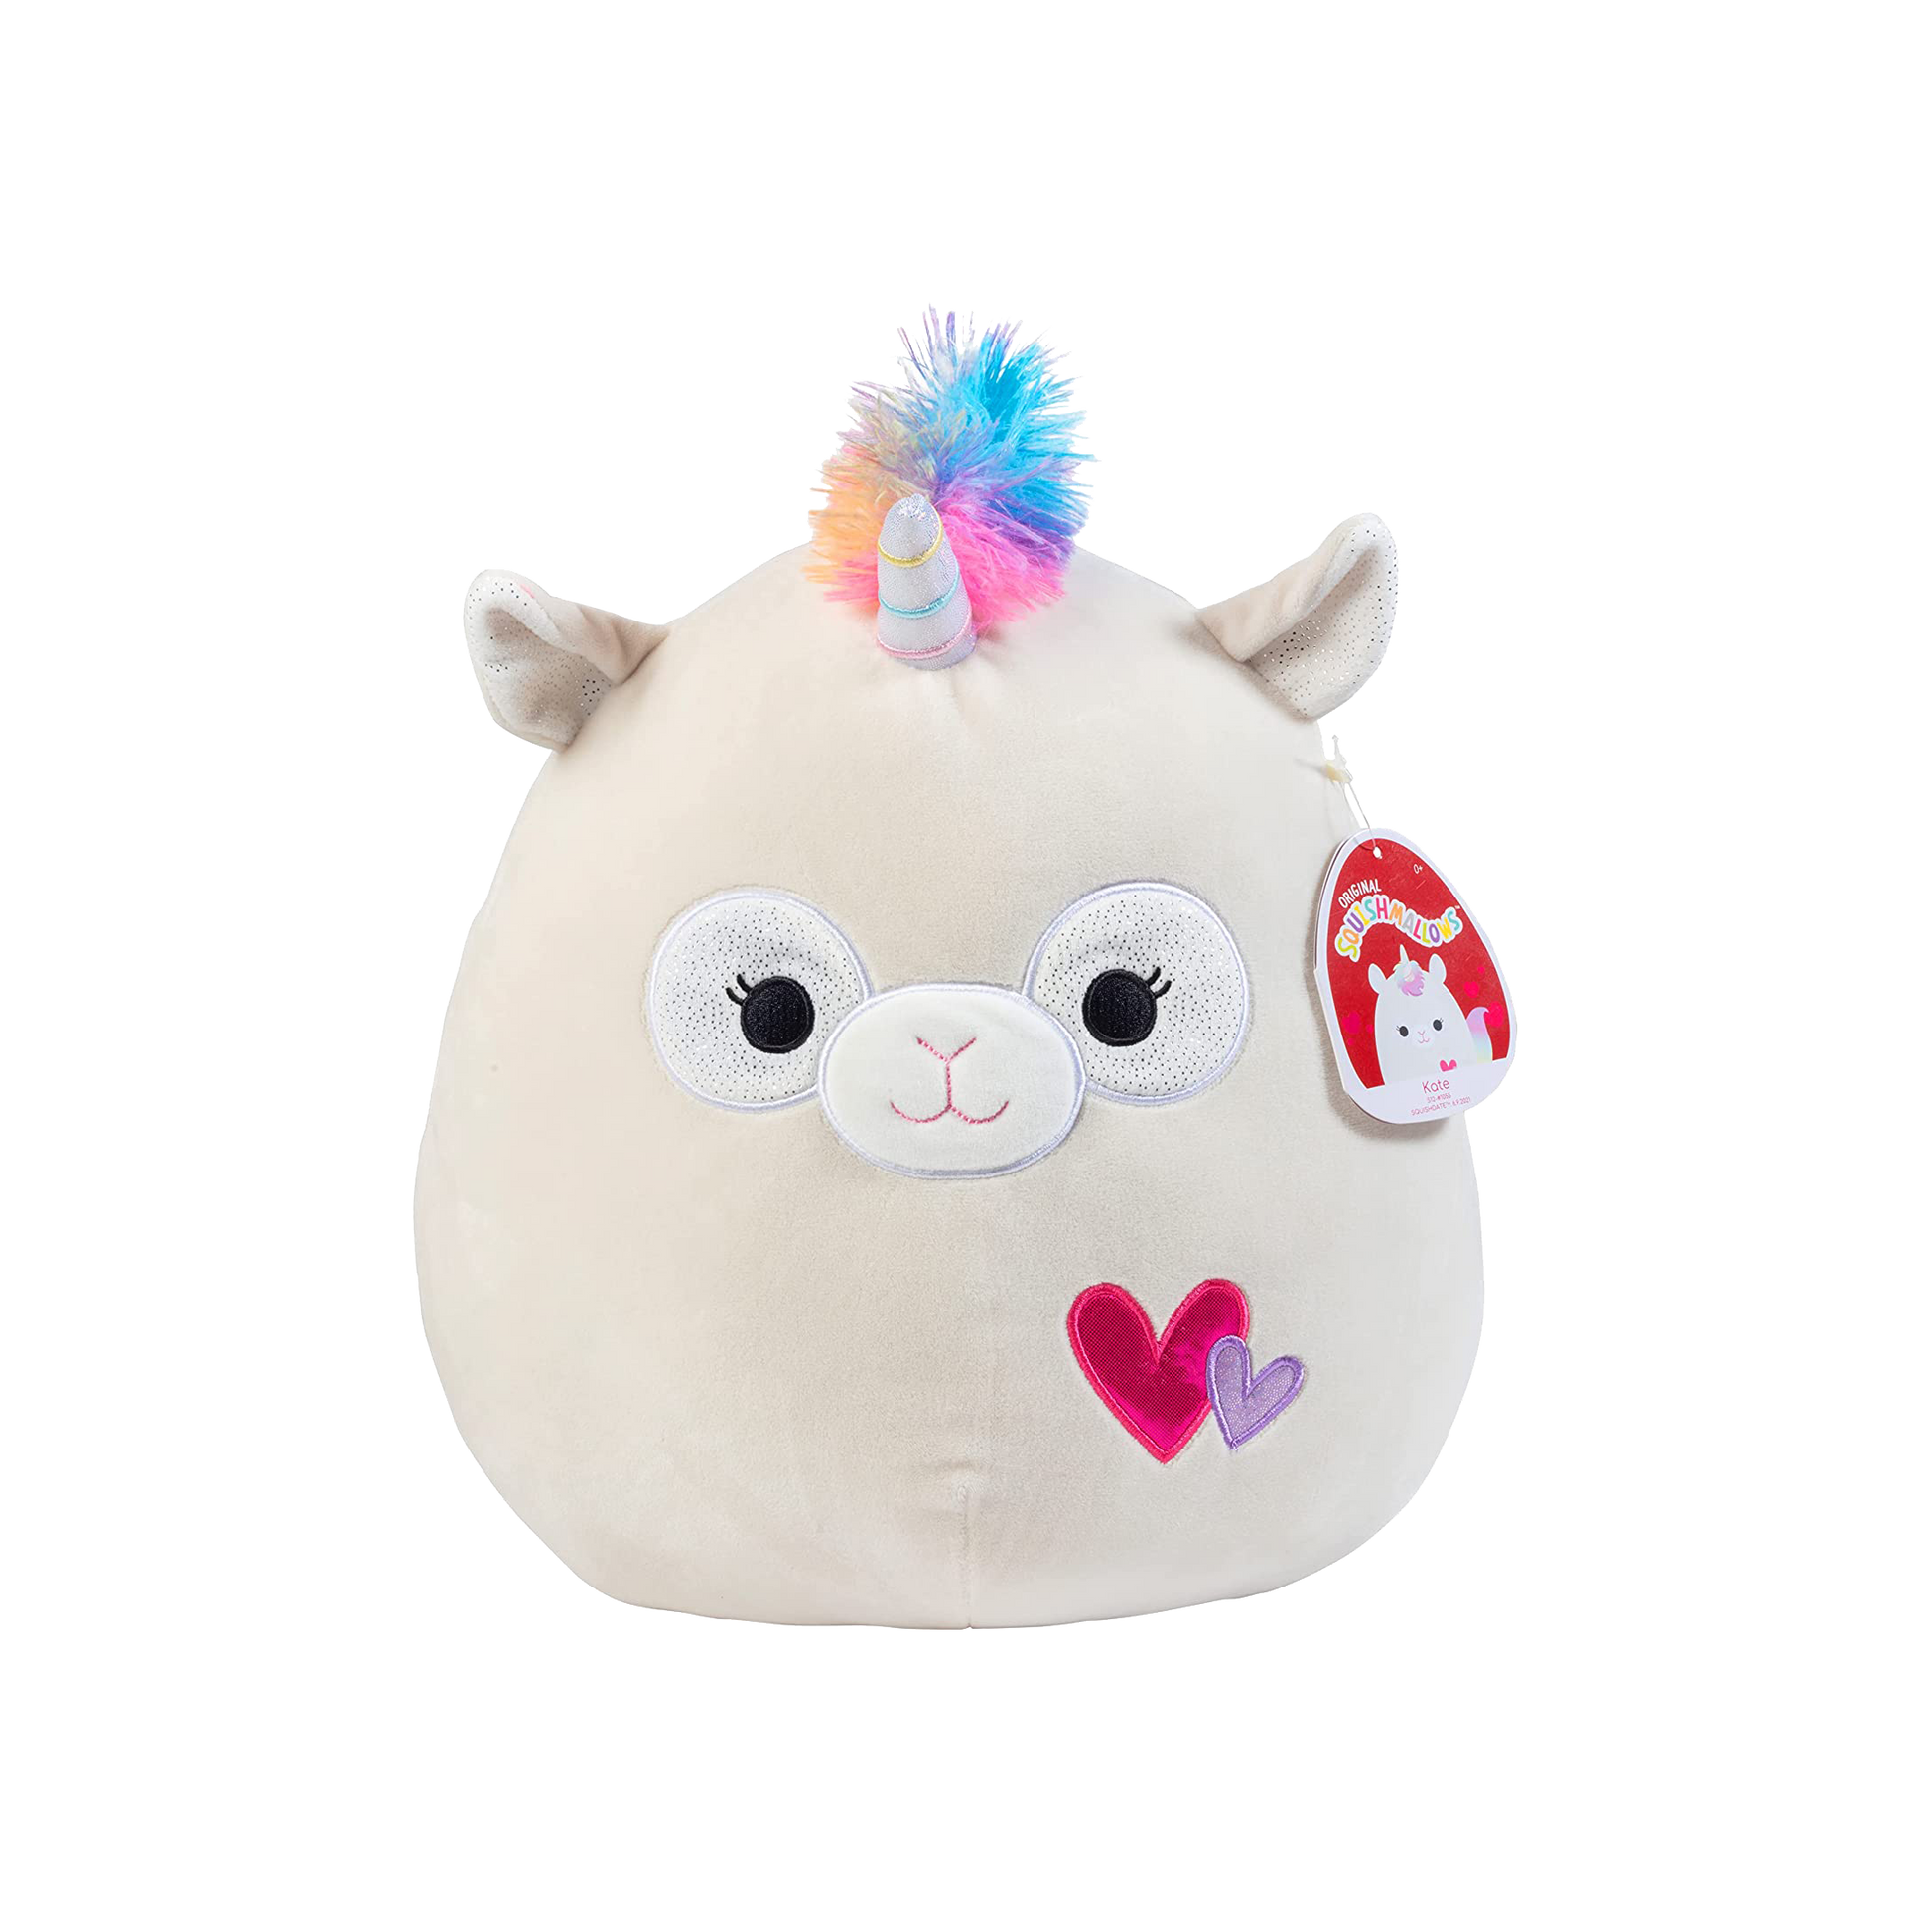 Squishmallow Soft Unicorn Stuffed Animal Toy (12-inch), Ages 2+